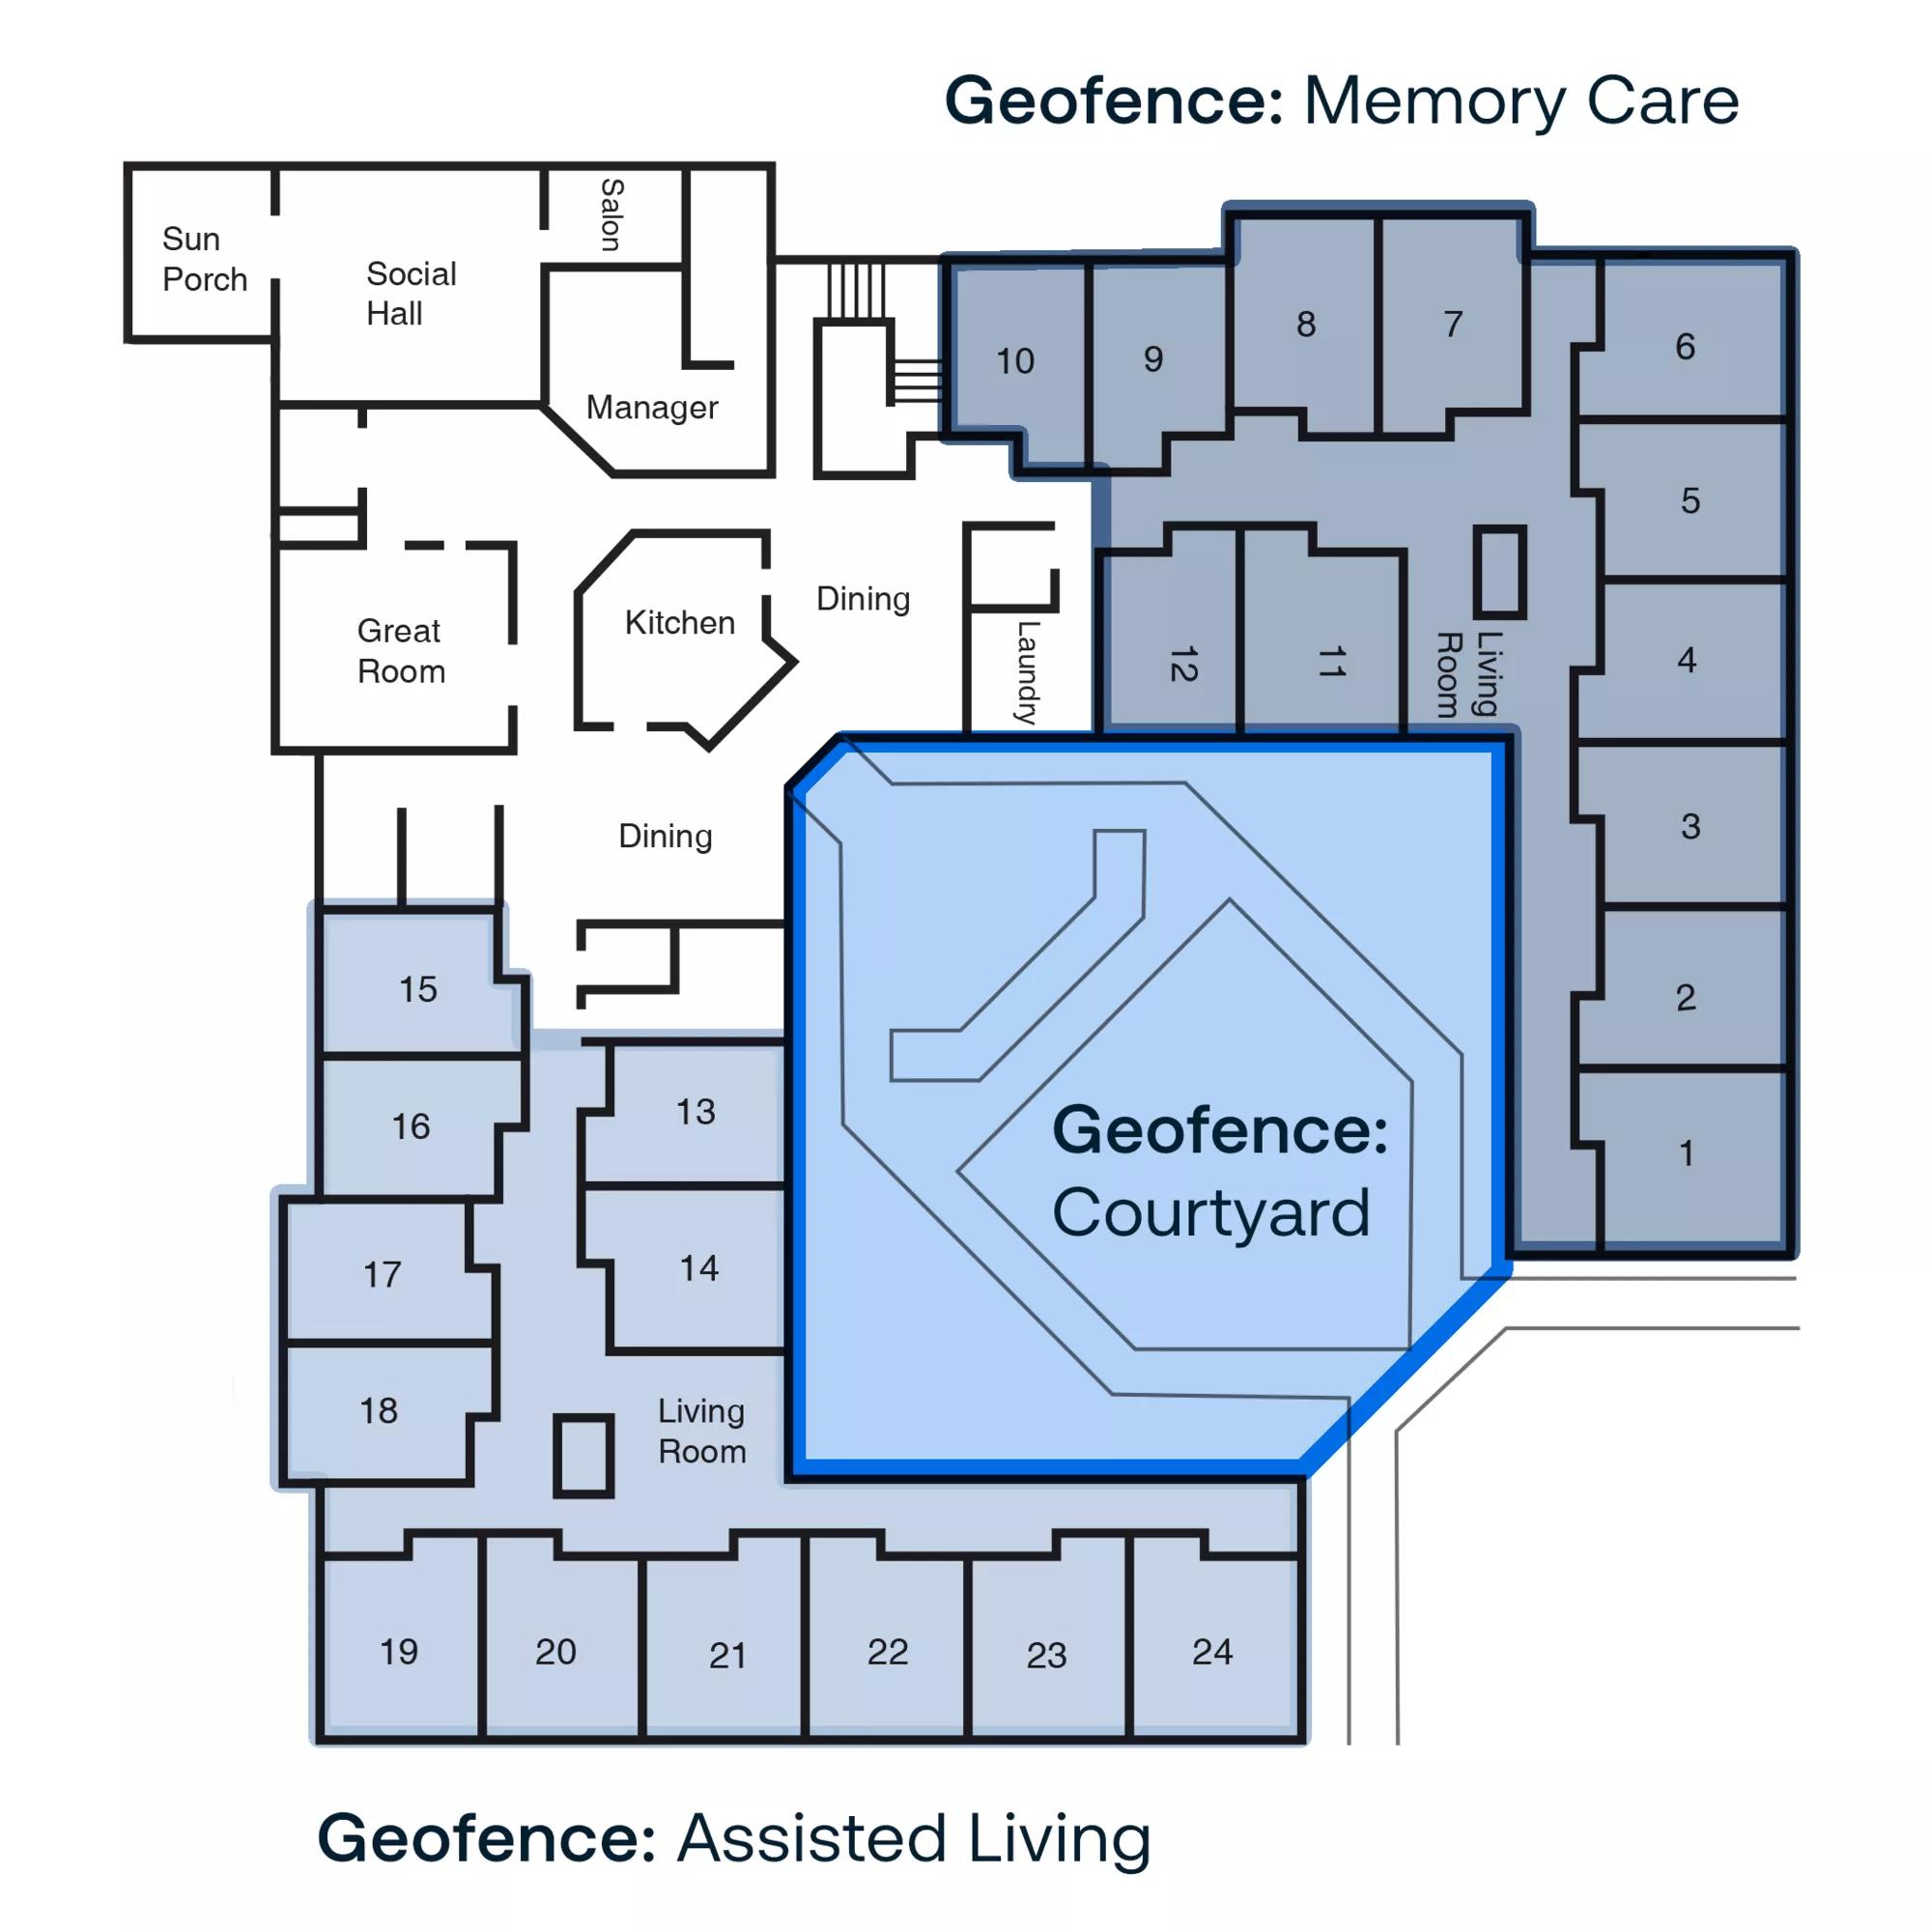 Example of geofencing in a Senior Living community with Securitas Healthcare's WanderGuard BLUE wander management solution